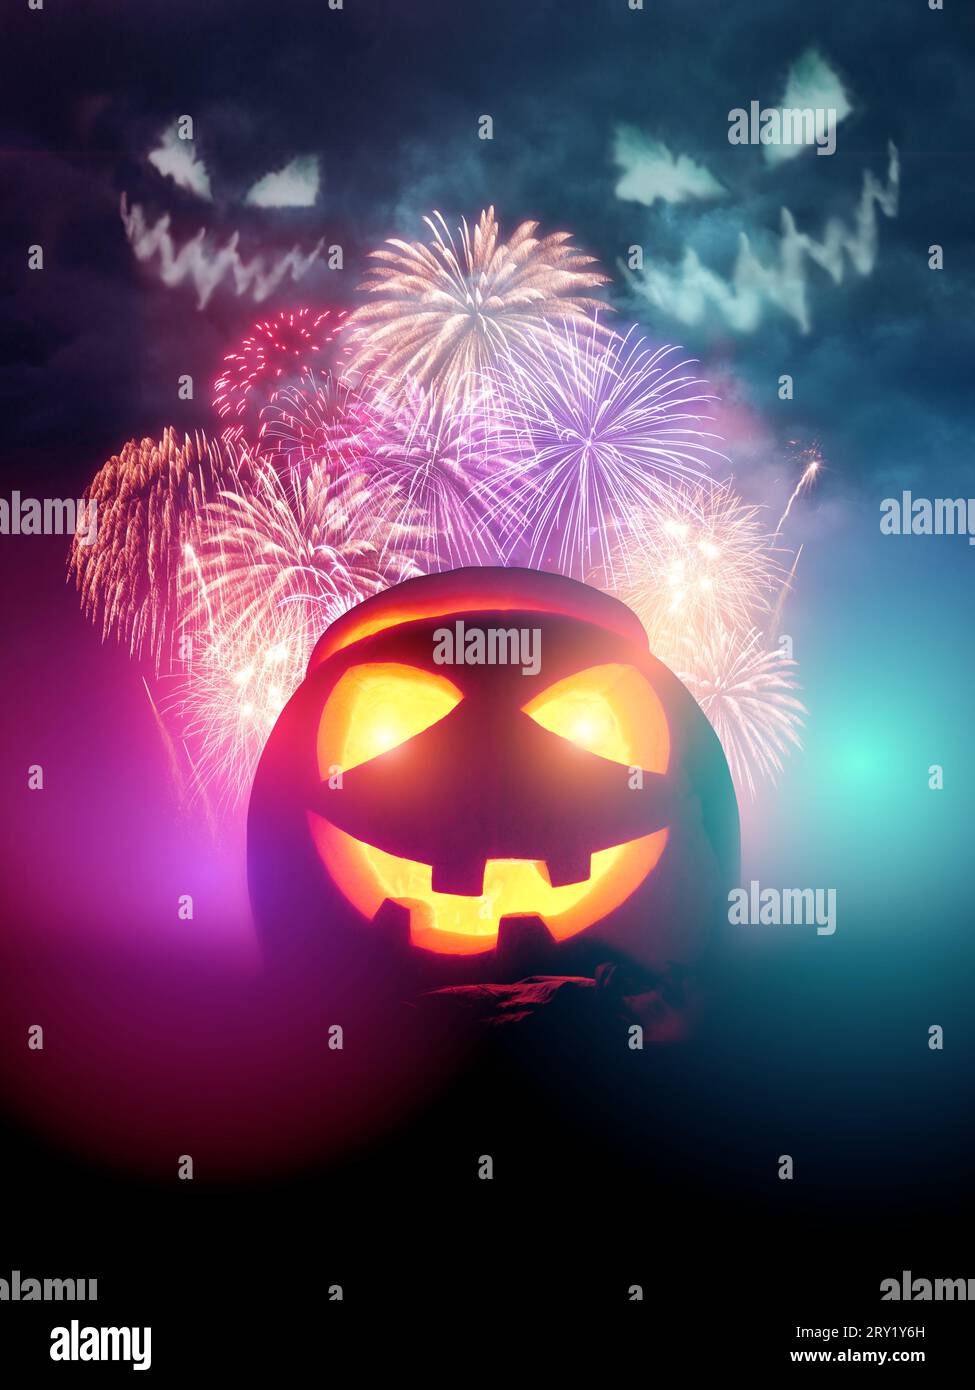 happy halloween poster background design! Featuring fireworks spooky faces and a glowing Jack O lantern pumpkin. Stock Photo